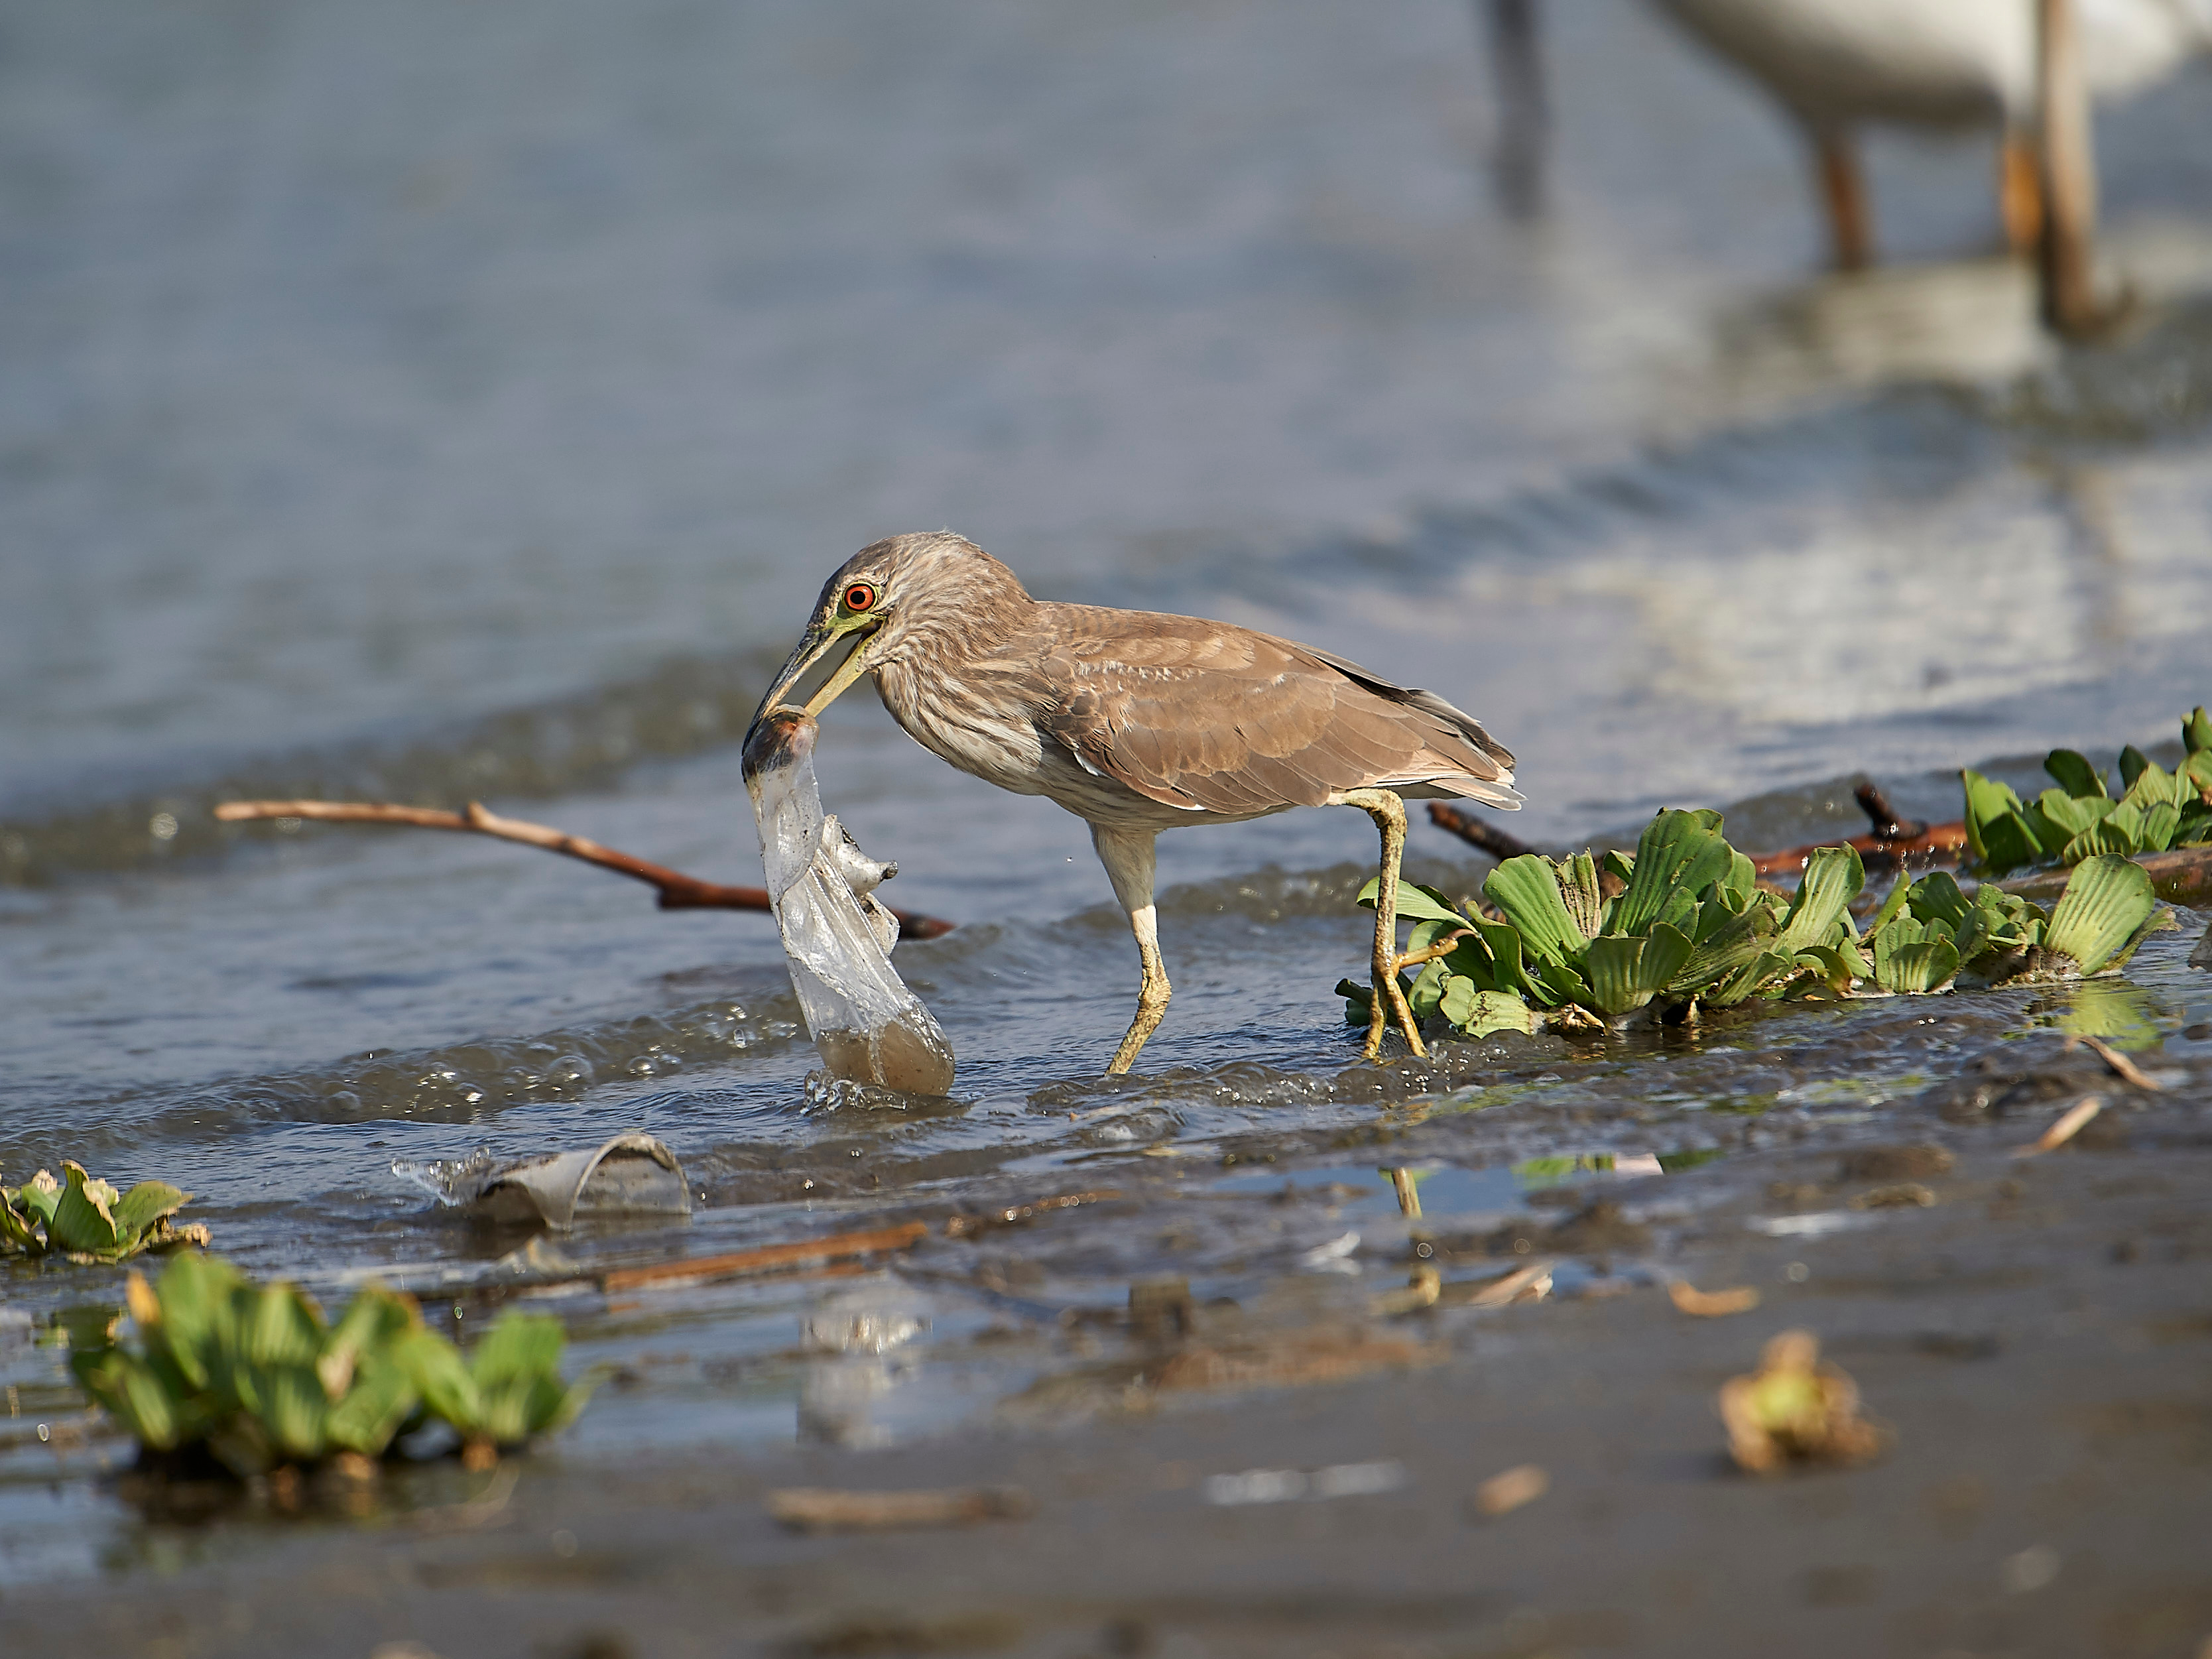 An immature black-crowned night heron attempts to swallow a plastic bag carelessly discarded with fish inside. (Stock photo)